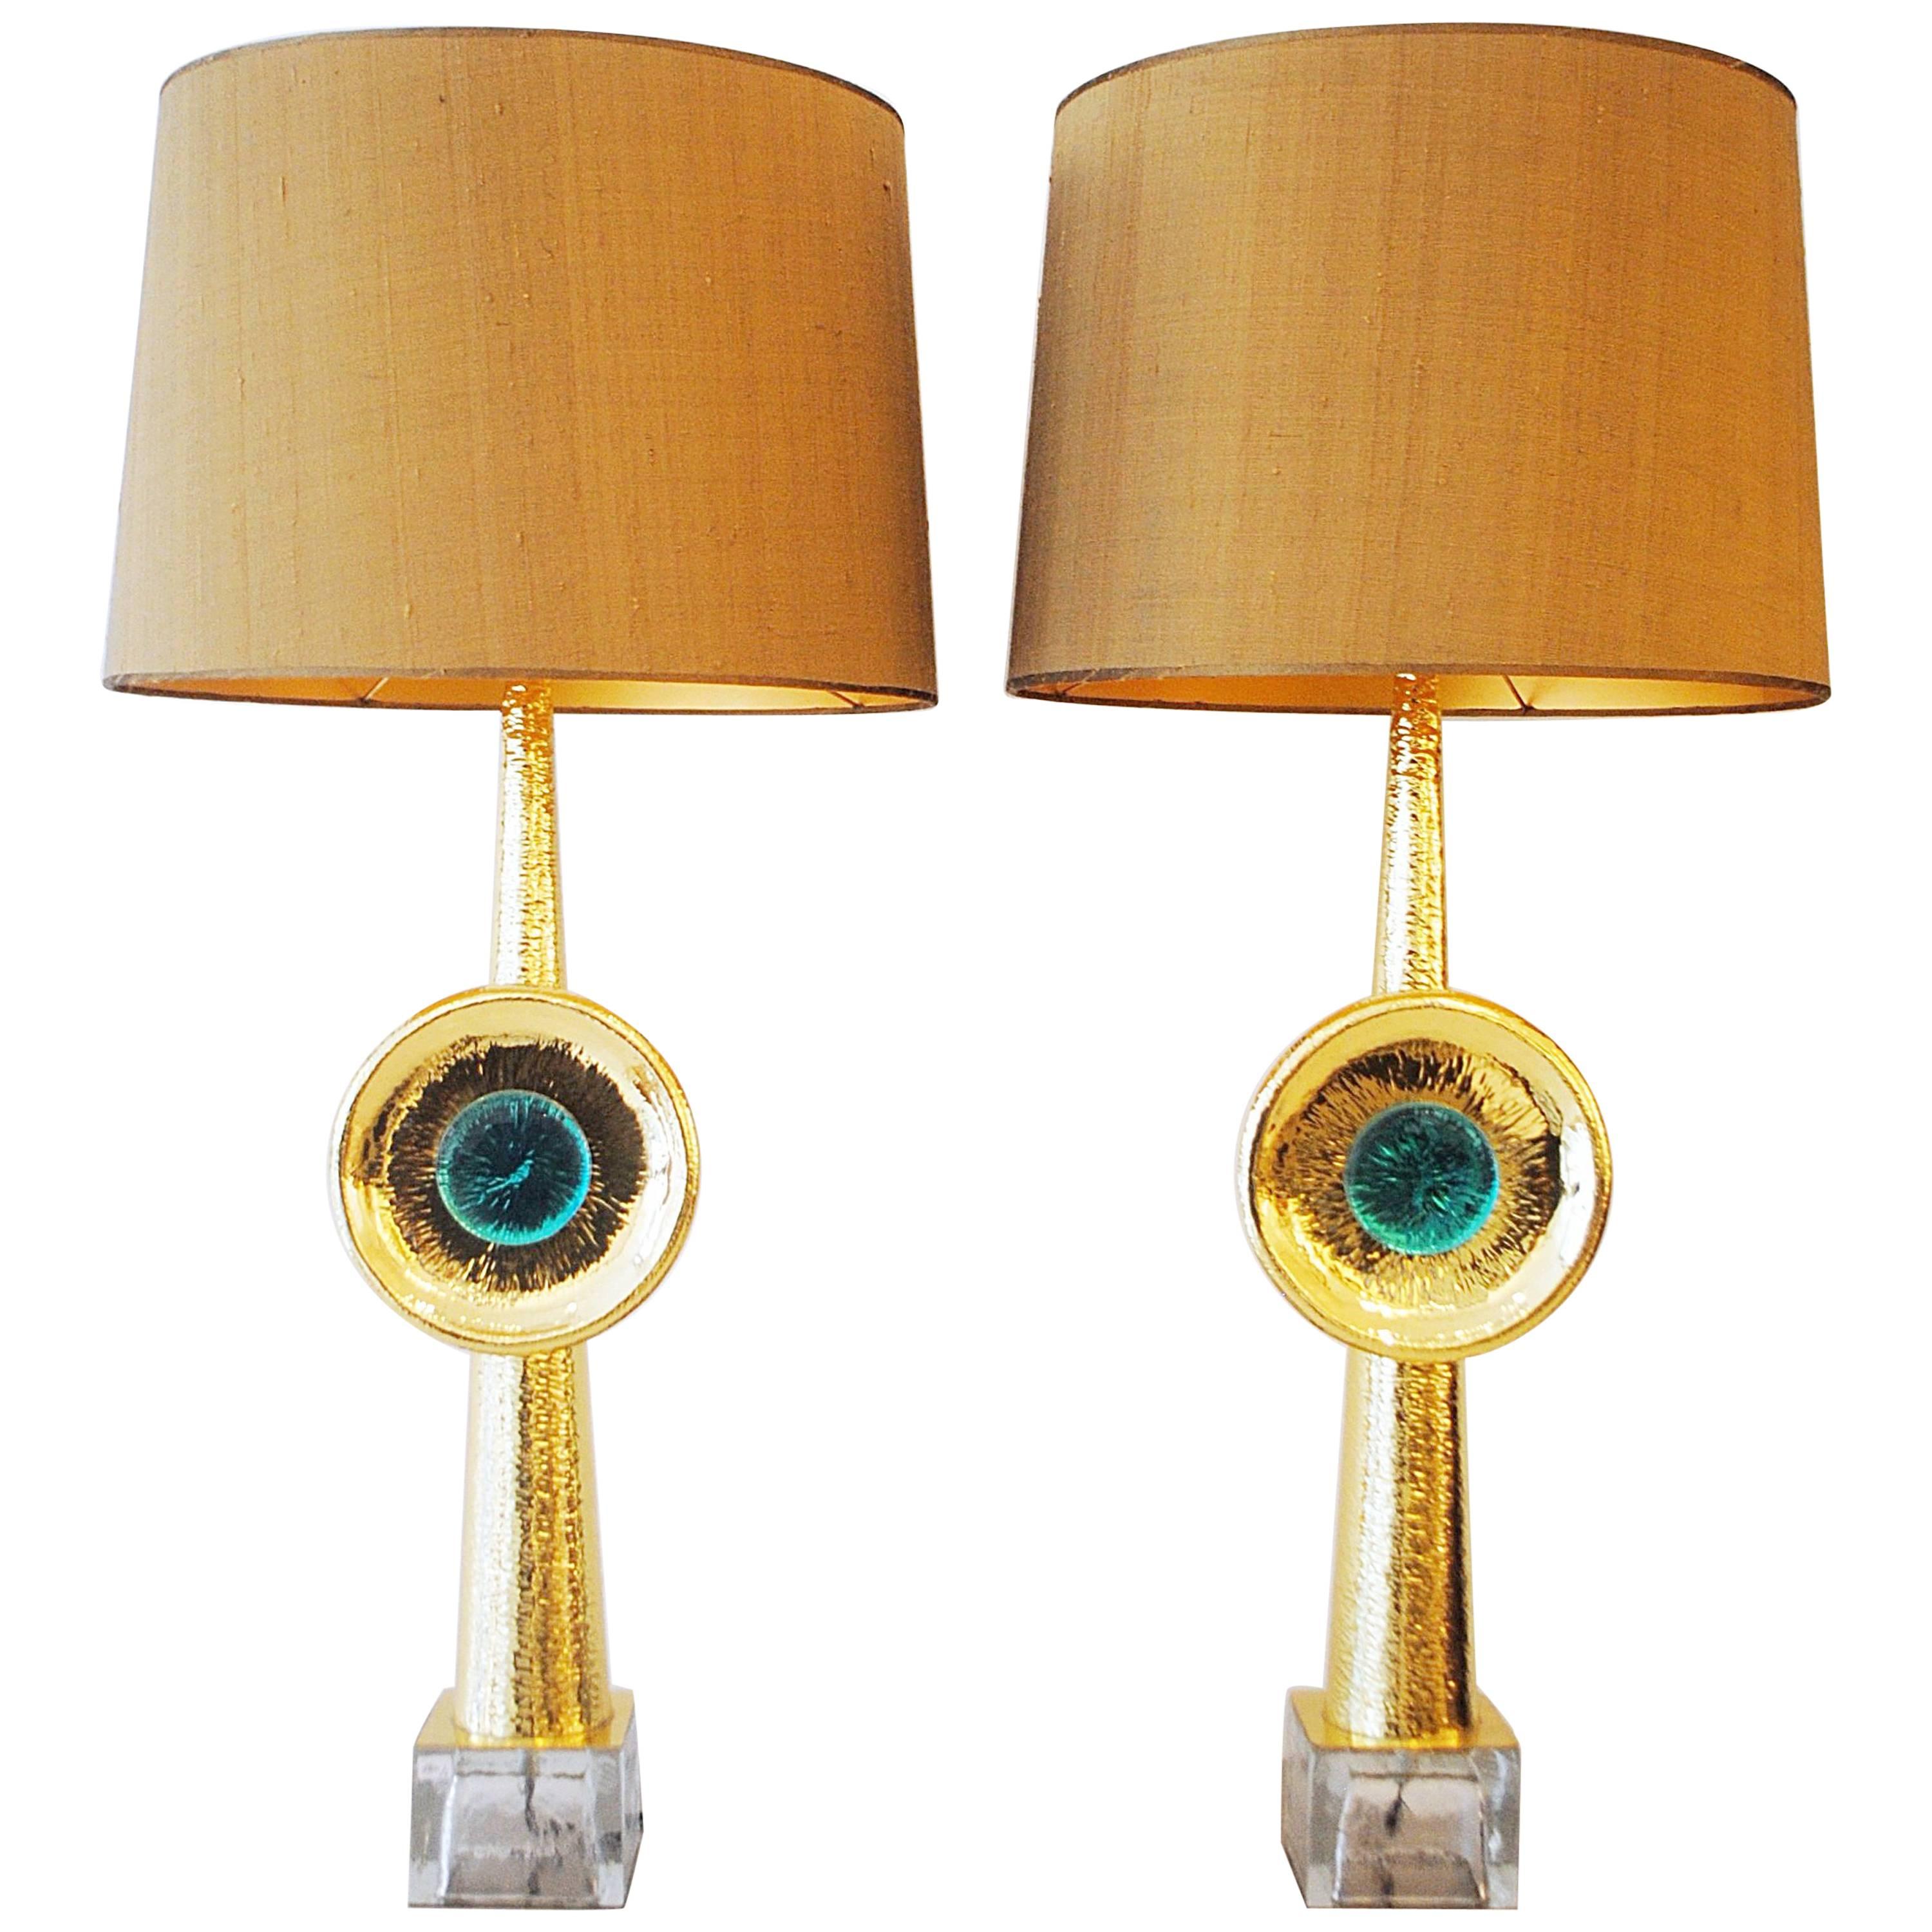 Pair of Two Brass and Glass Lamps, 21st Century, Italy